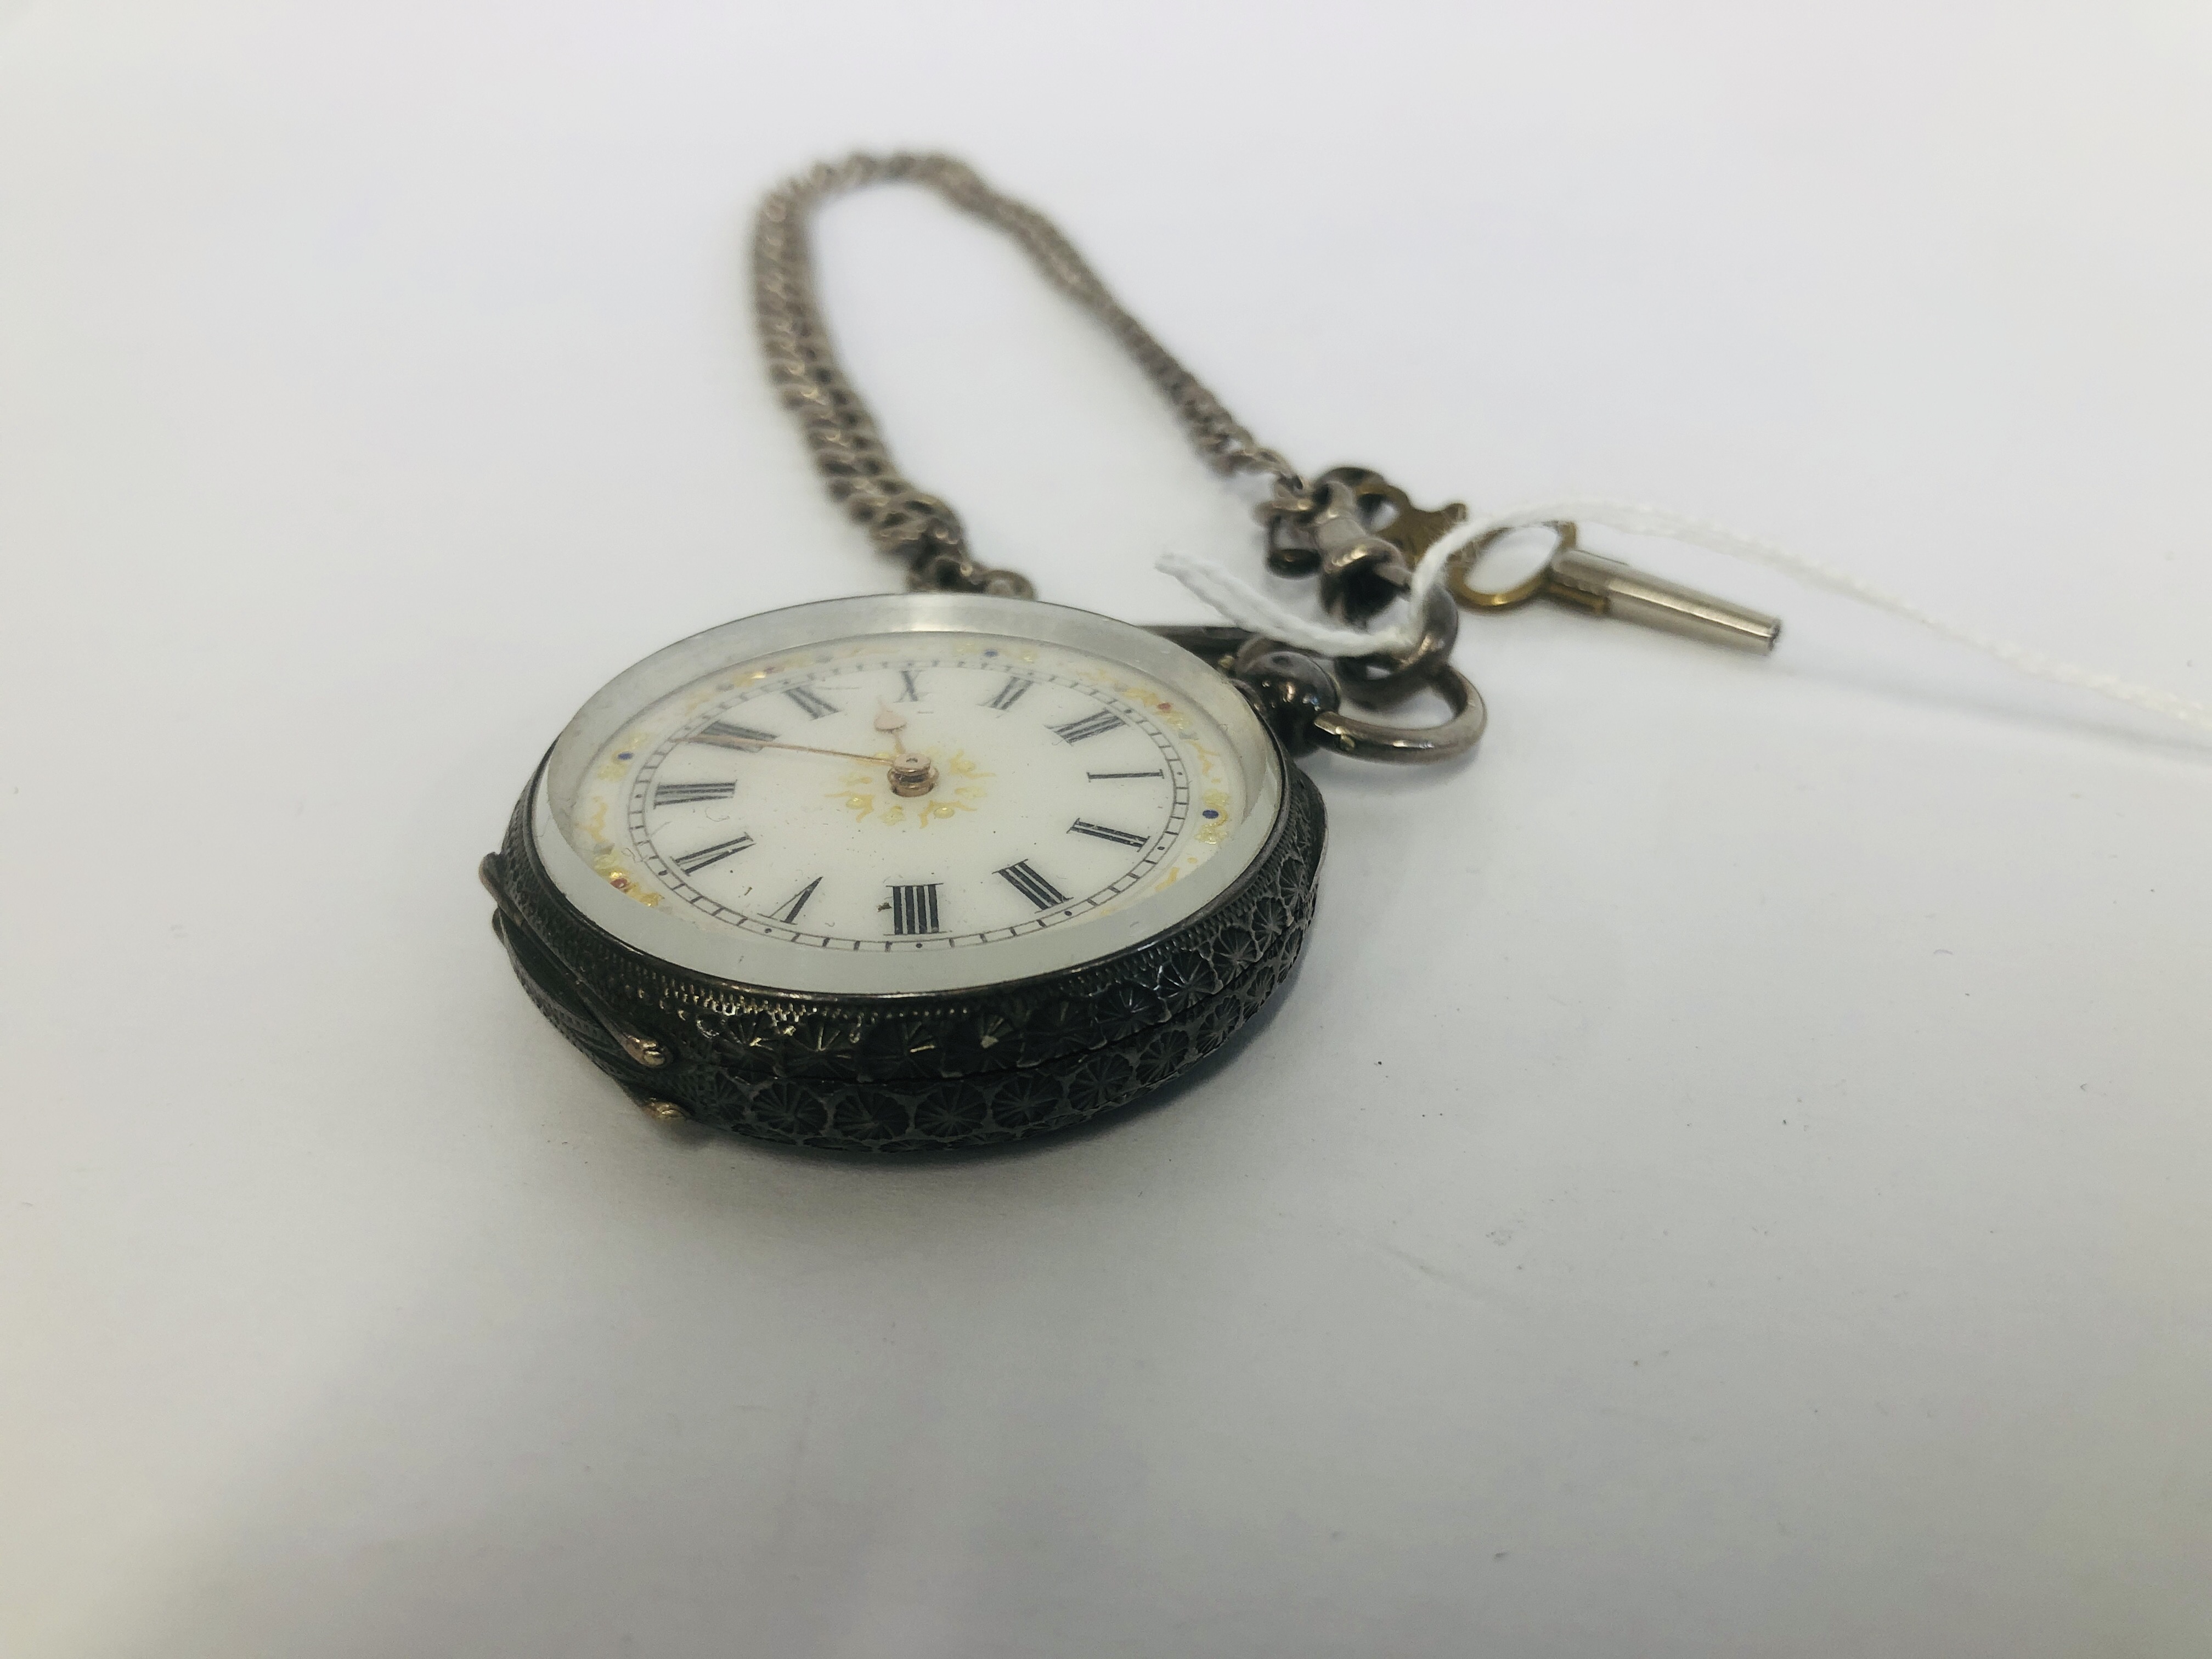 AN ORNATE SILVER POCKET WATCH WITH DECORATIVE ENAMELLED FACE ON SILVER T-BAR CHAIN - Image 3 of 6